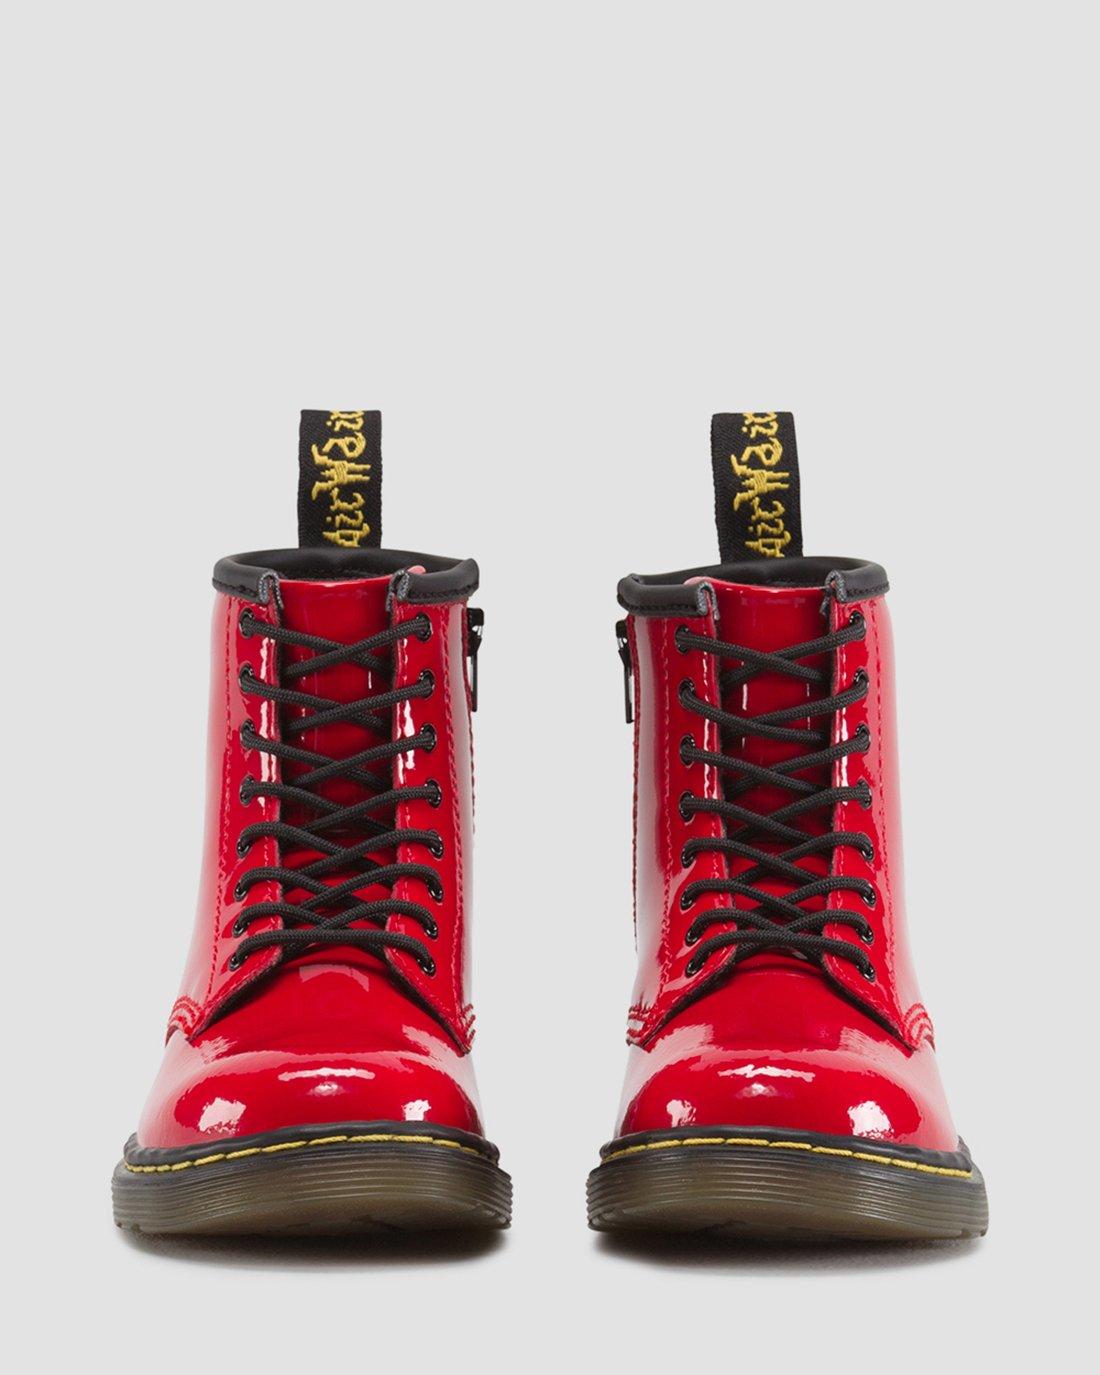 Toddler 1460 Patent Leather Lace Up Boots in Red | Dr. Martens